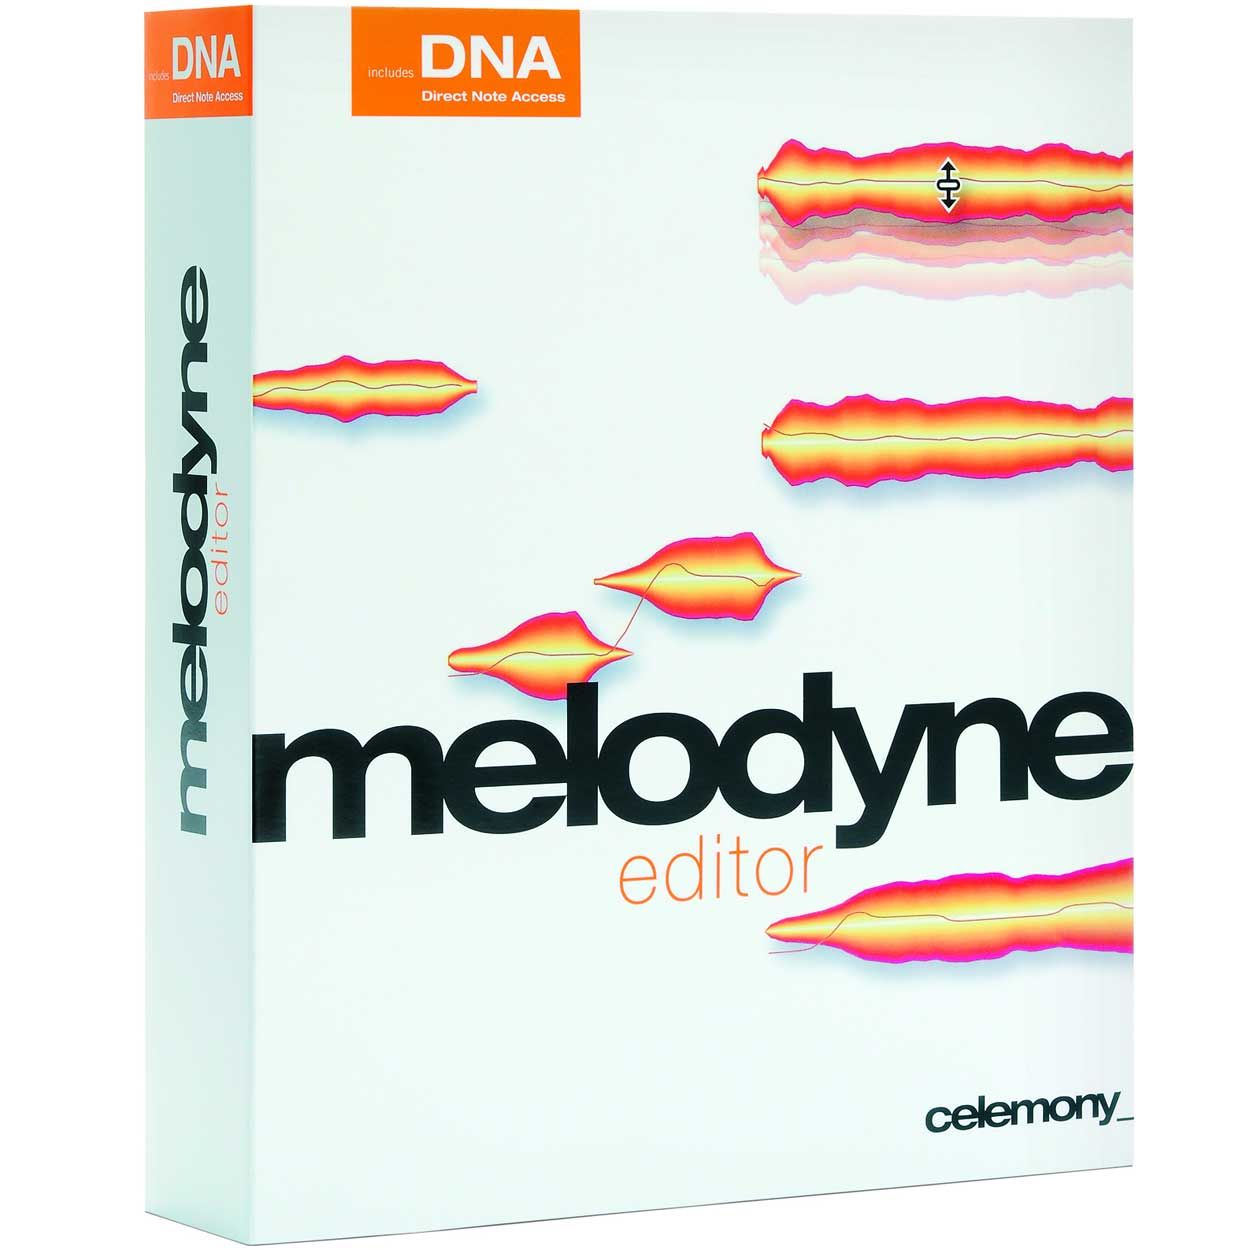 Melodyne Crack 5 v5.3.4 With Serial Key (Win) 2022 Free Download